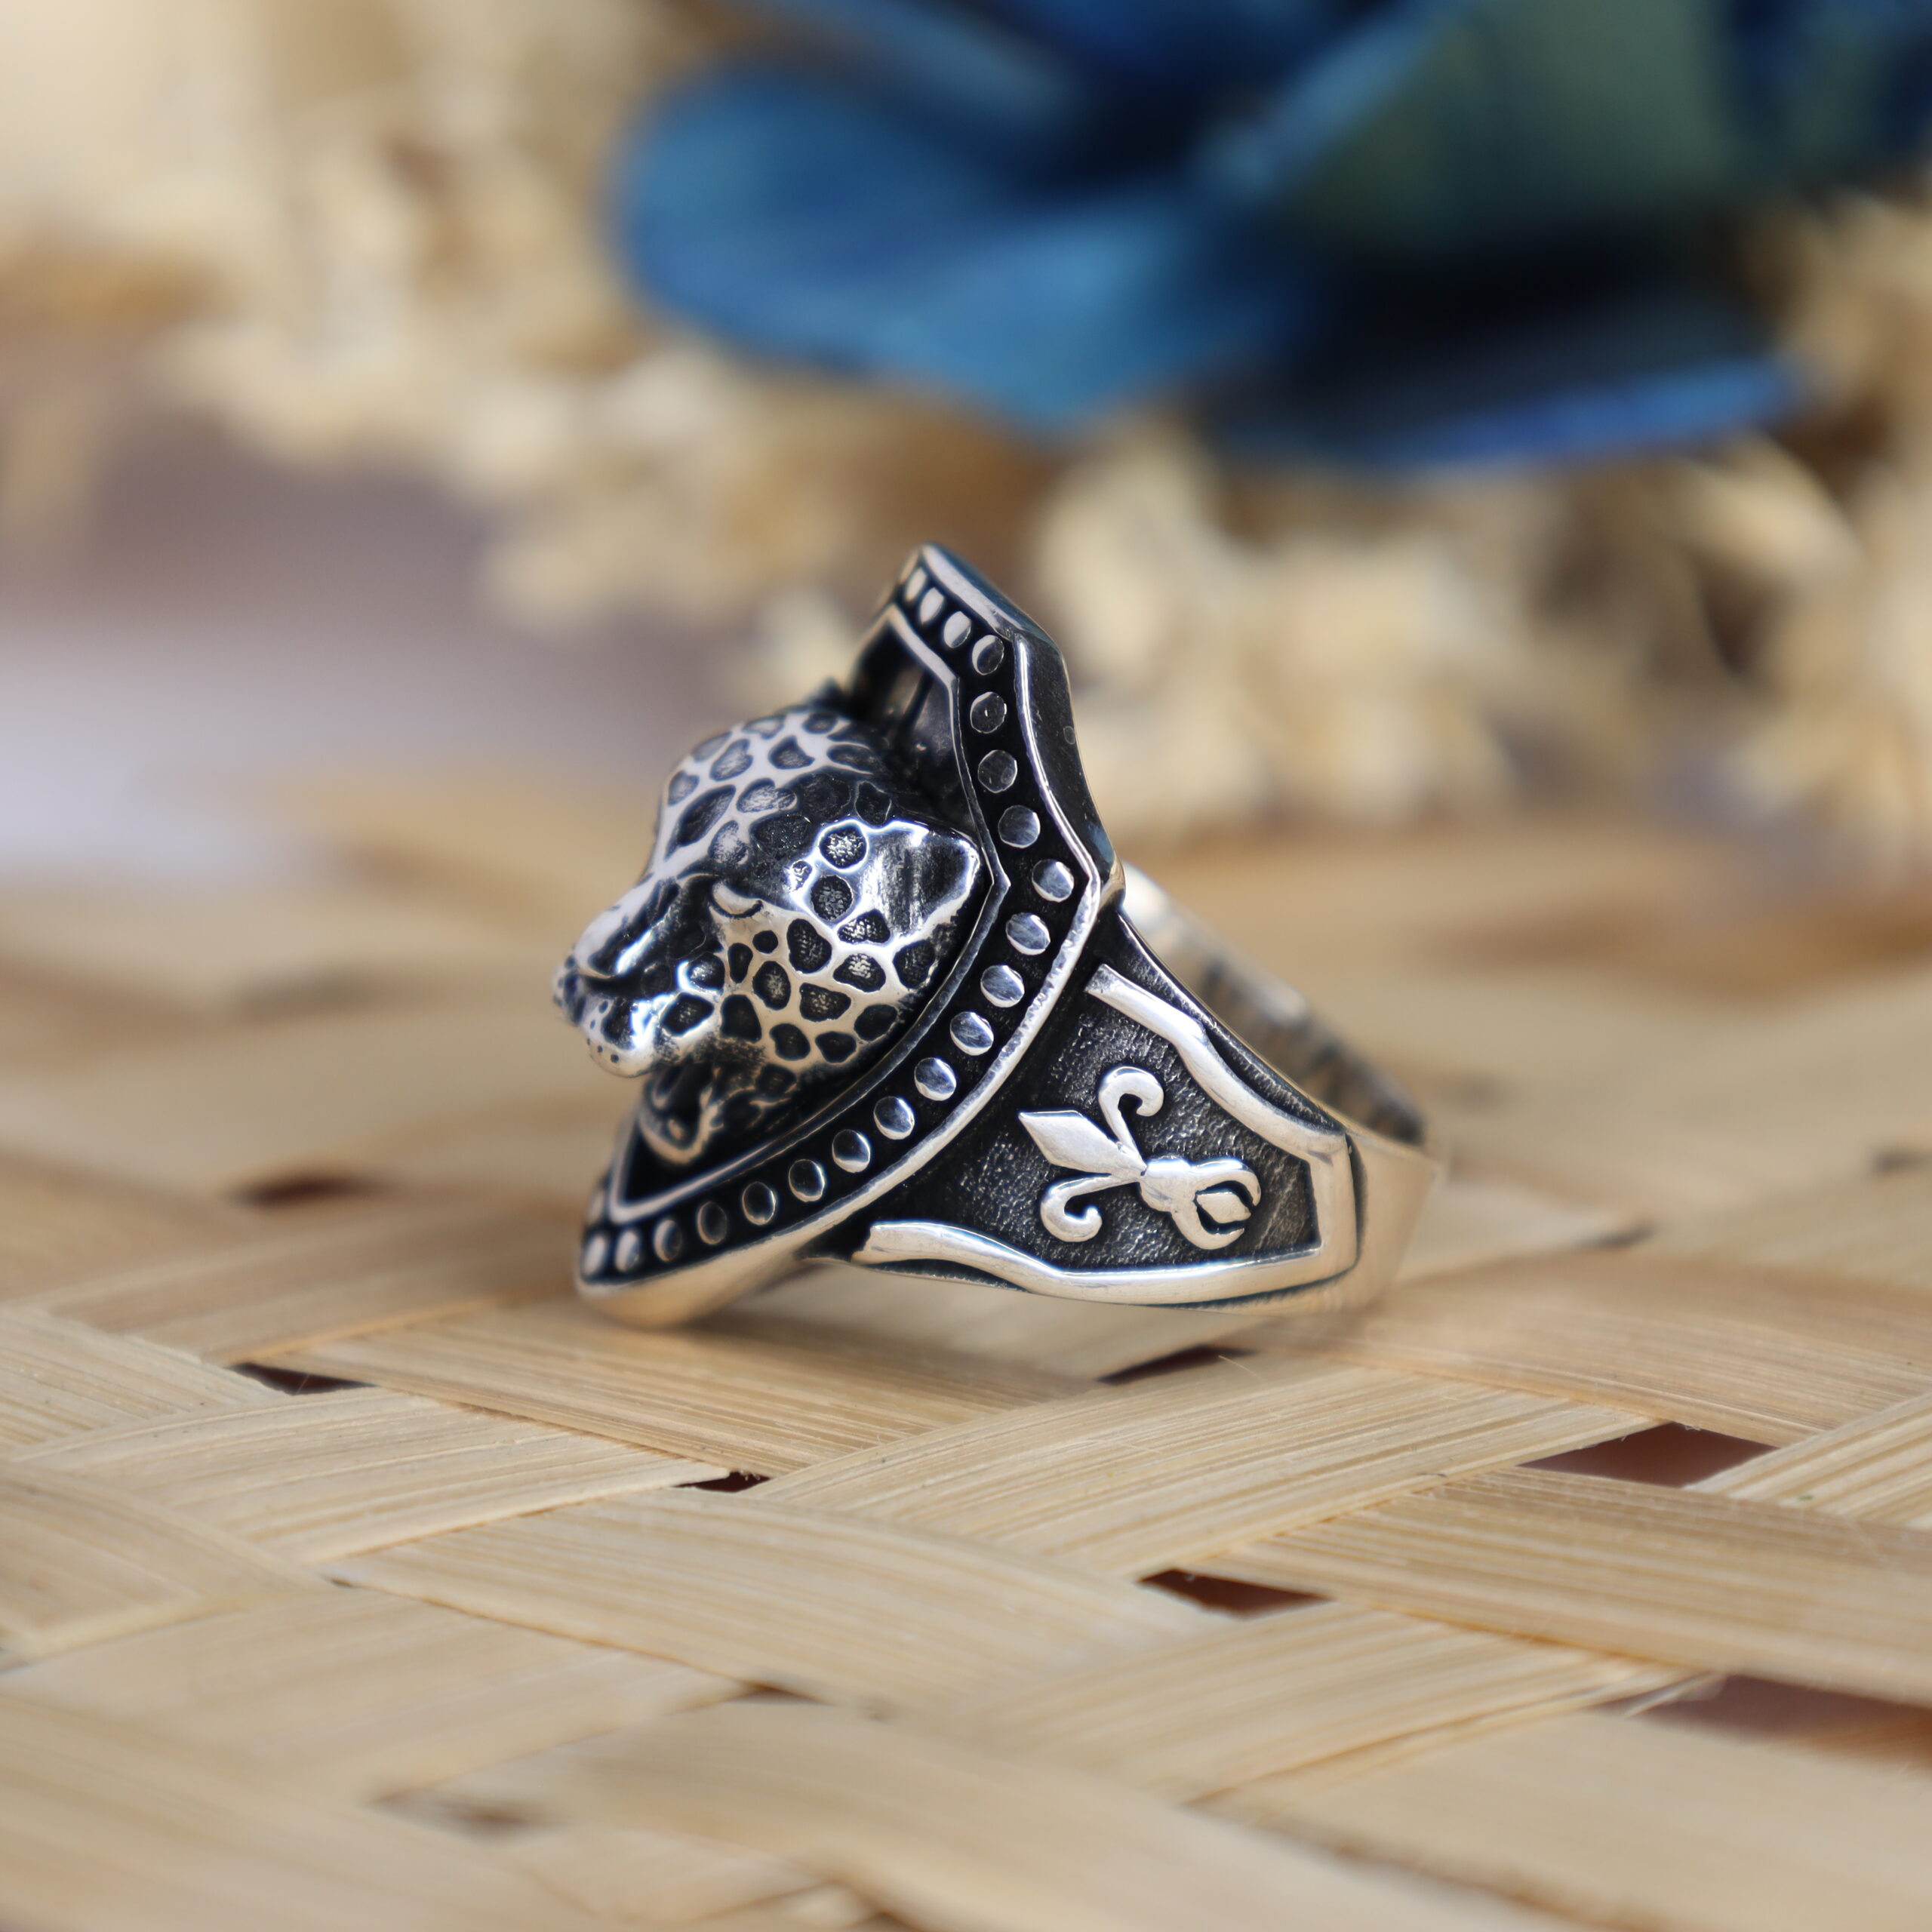 How to Choose The Right Silver Ring for Men